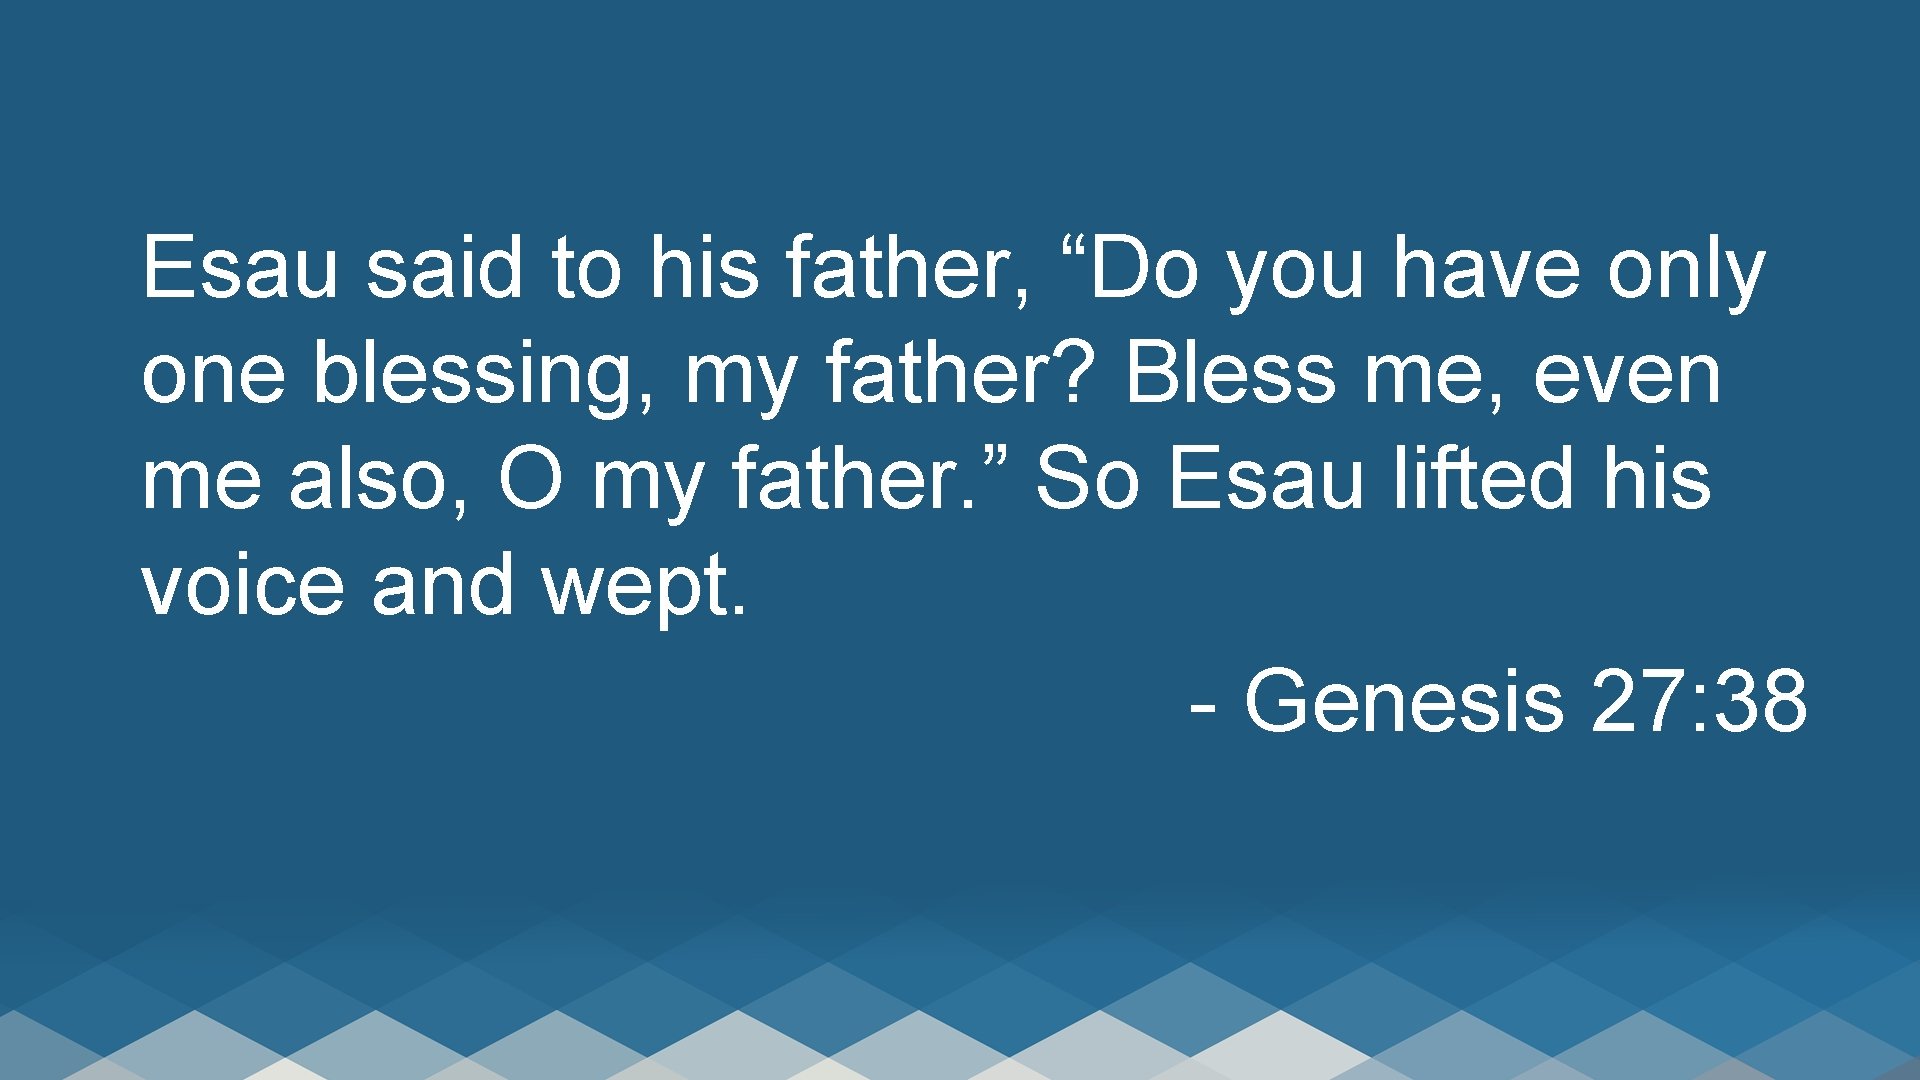 Esau said to his father, “Do you have only one blessing, my father? Bless